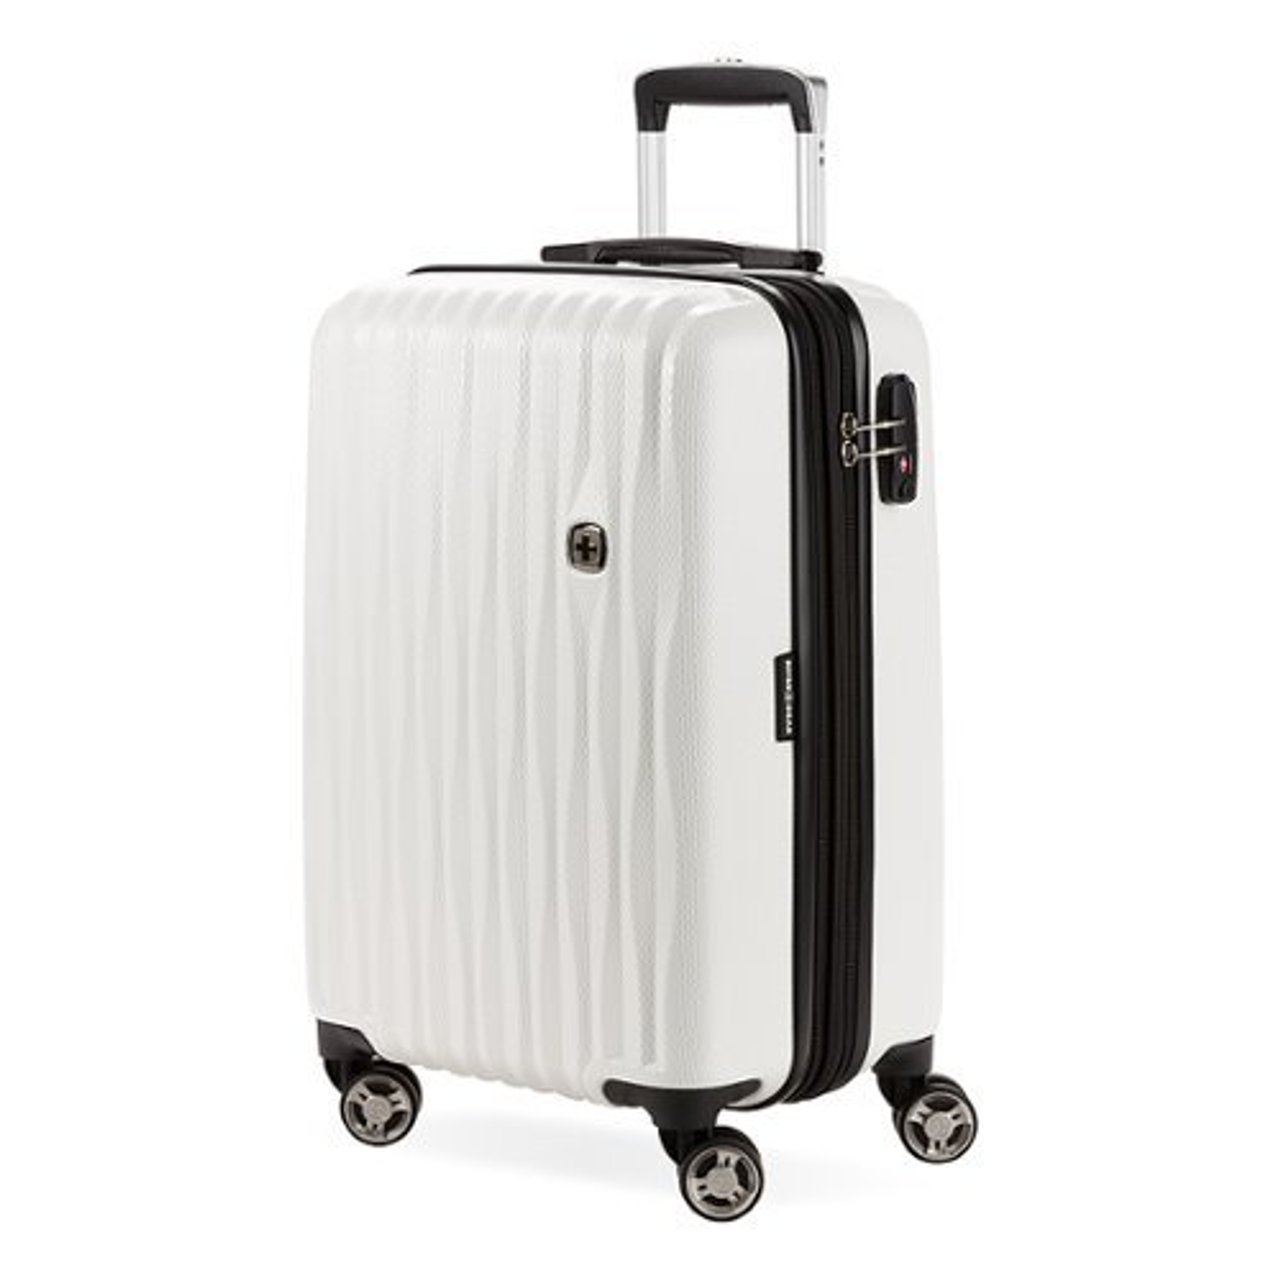 SwissGear - Energie 20" Carry On Spinner Suitcase with USB - White